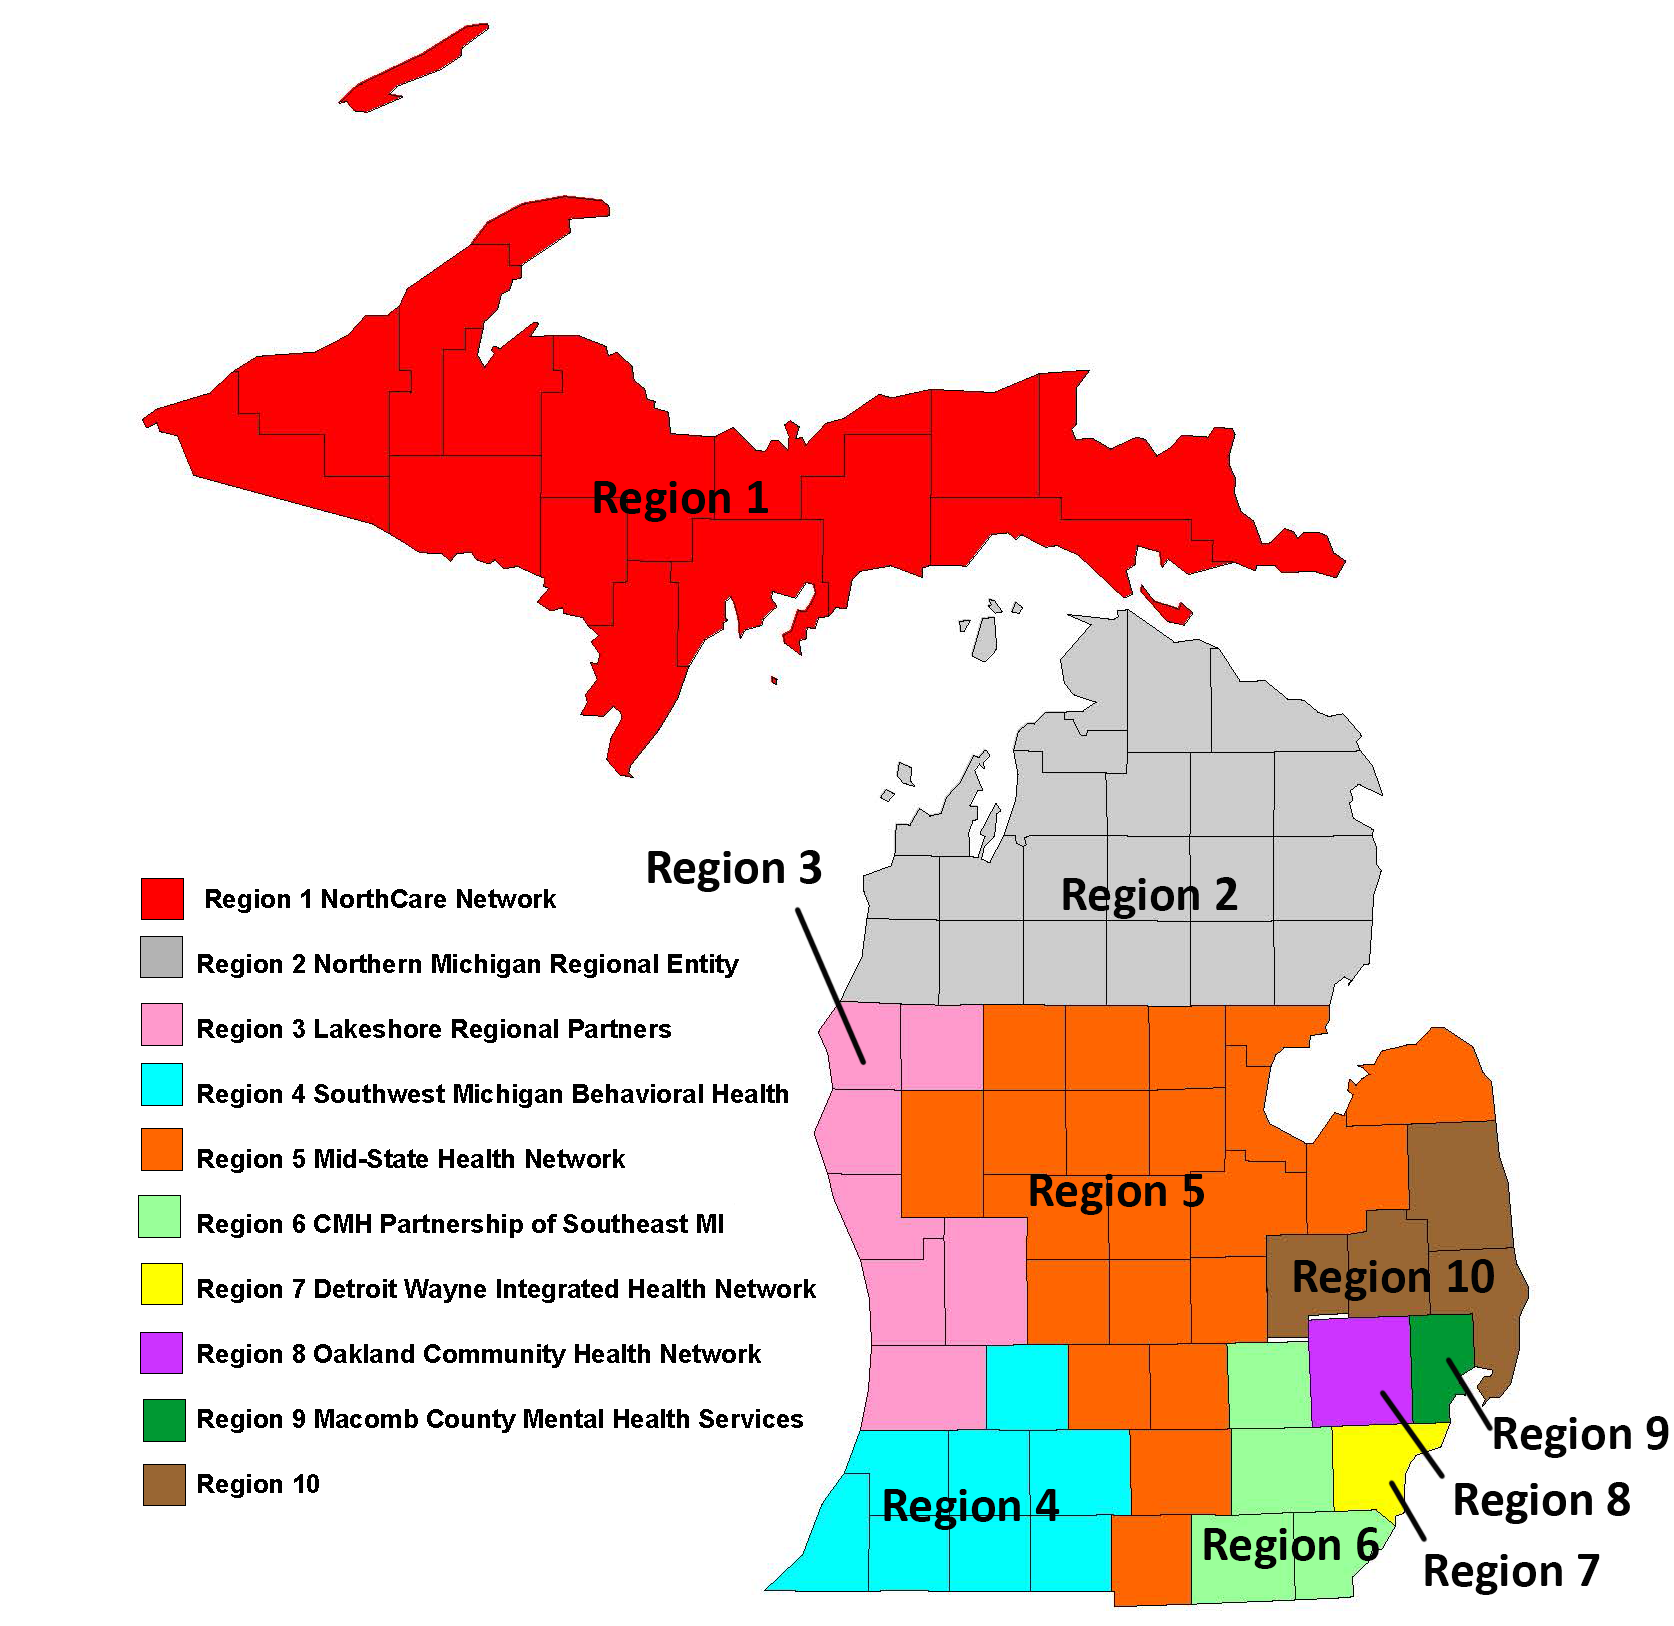 Visual description: Map of Michigan with colors indicating specific regions. Region 1 North Care Network is red, Region 2 Northern Michigan Regional Entity is gray, Region 3 Lakeshore Regional Partners is pink, Region 4 Southwest Michigan Behavioral Health is light blue, Region 5 Mid-State Health Network is orange, Region 6 CMH Partnership of Southeast Michigan is light green, Region 7 Detroit Wayne Integrated Health Network is yellow, Region 8 Oakland Community Health Network is purple, Region 9 Macomb County Mental Health Services is dark green, and Region 10 is brown.